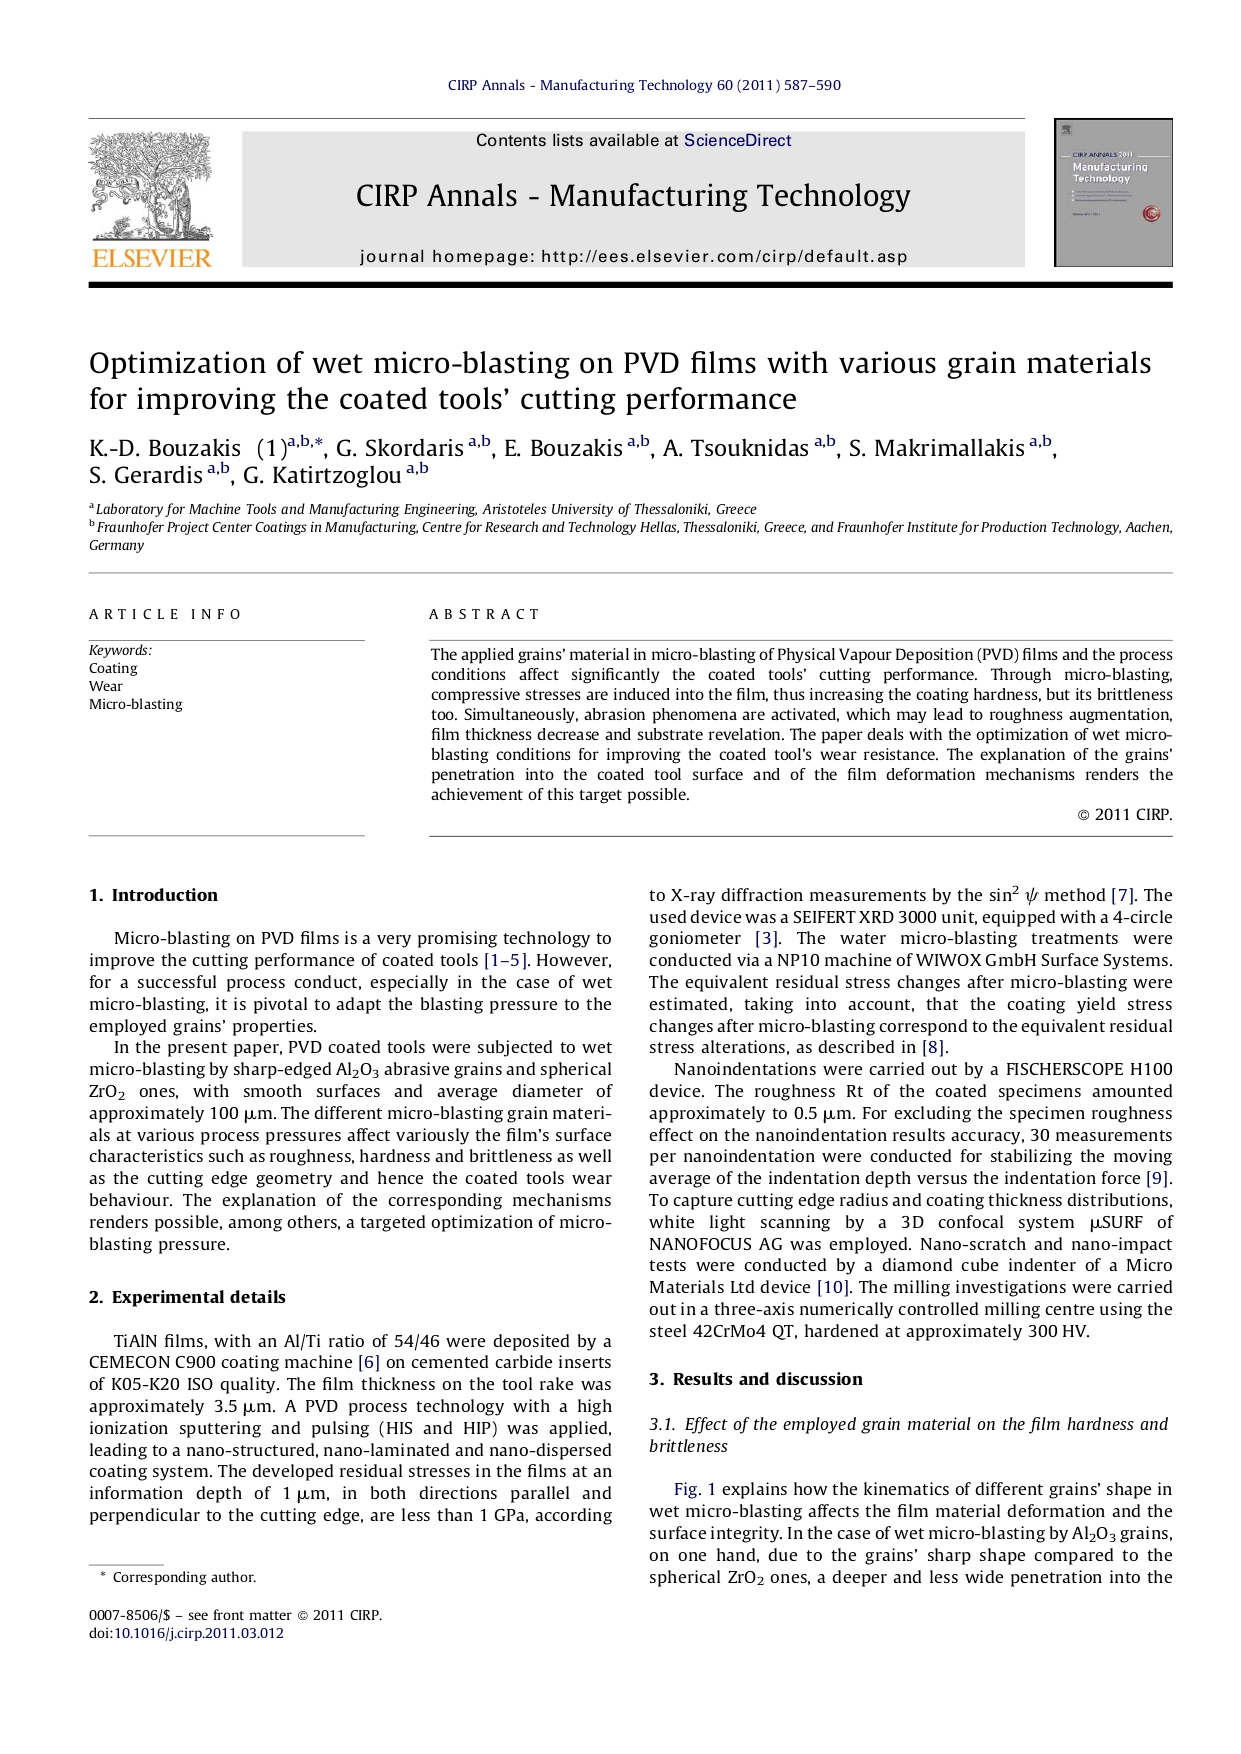 Optimization of wet micro-blasting on PVD films with various grain materials for improving the coated tools' cutting performance_page-0001.jpg